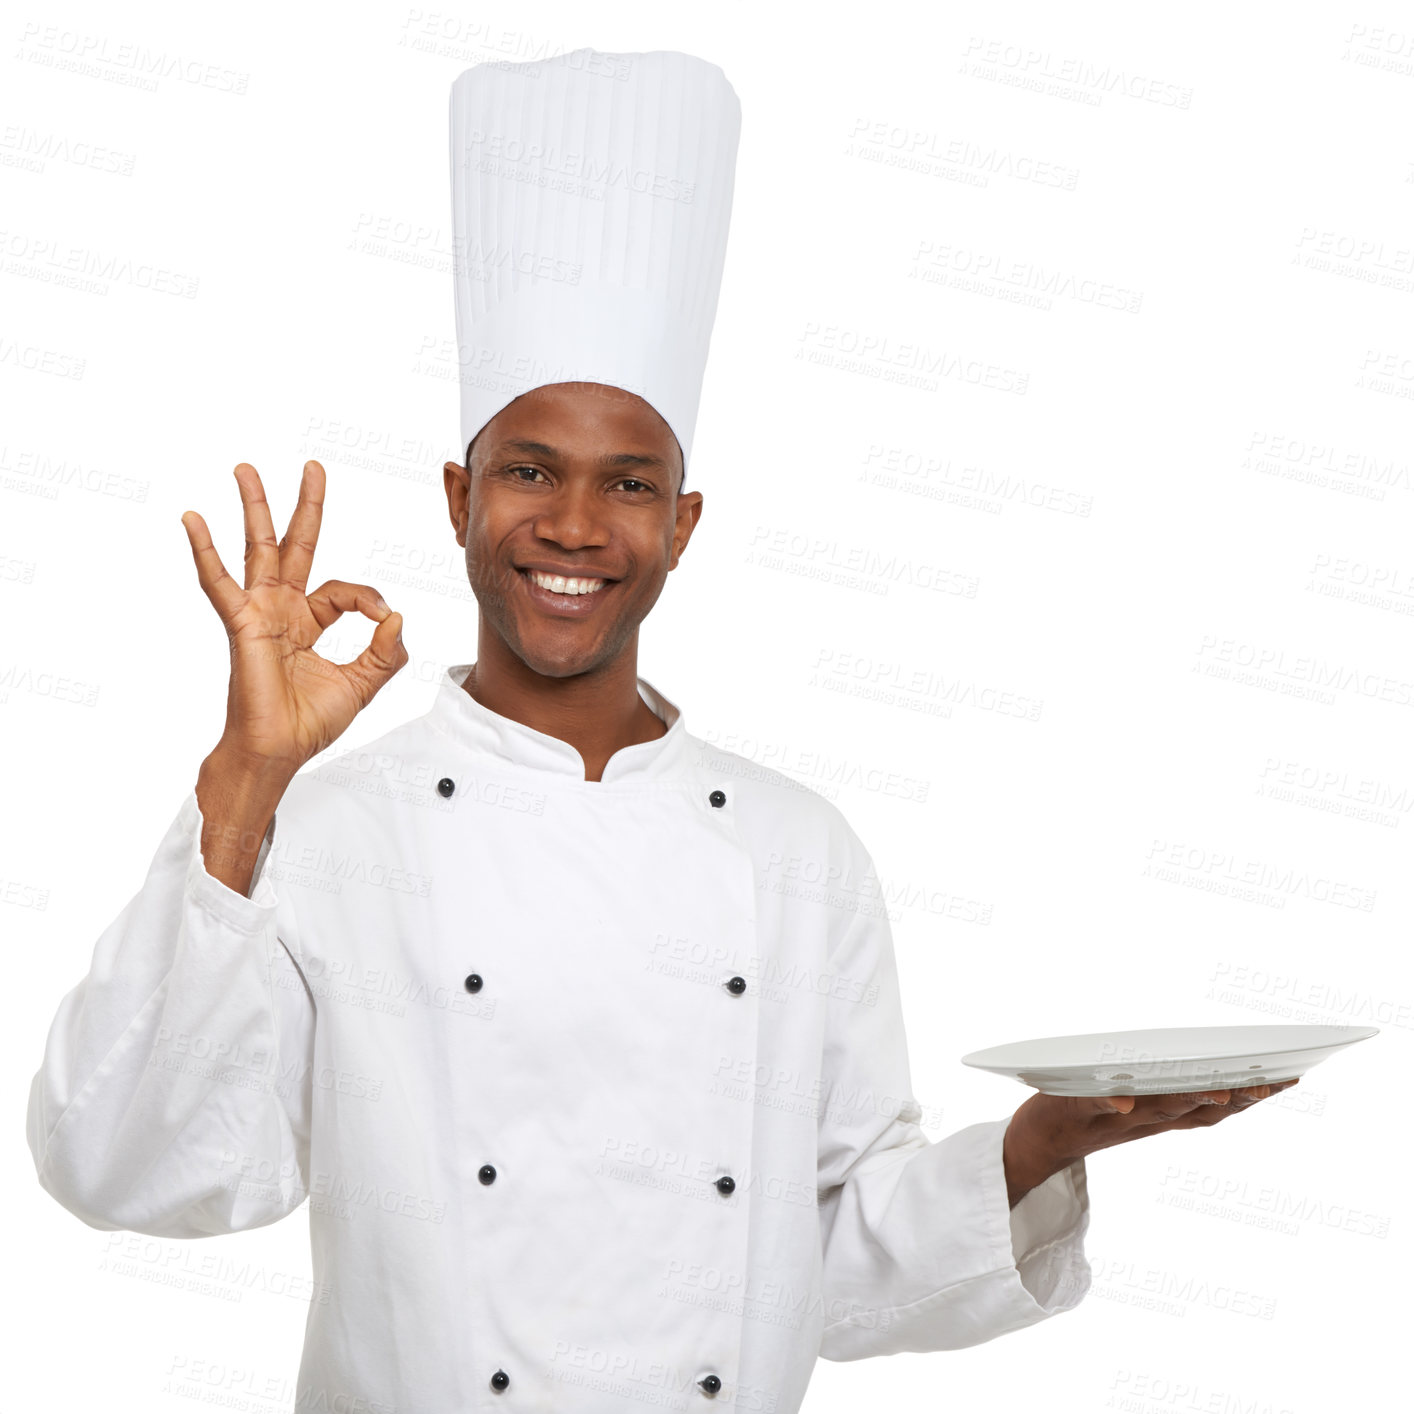 Buy stock photo Portrait of an african chef signaling 